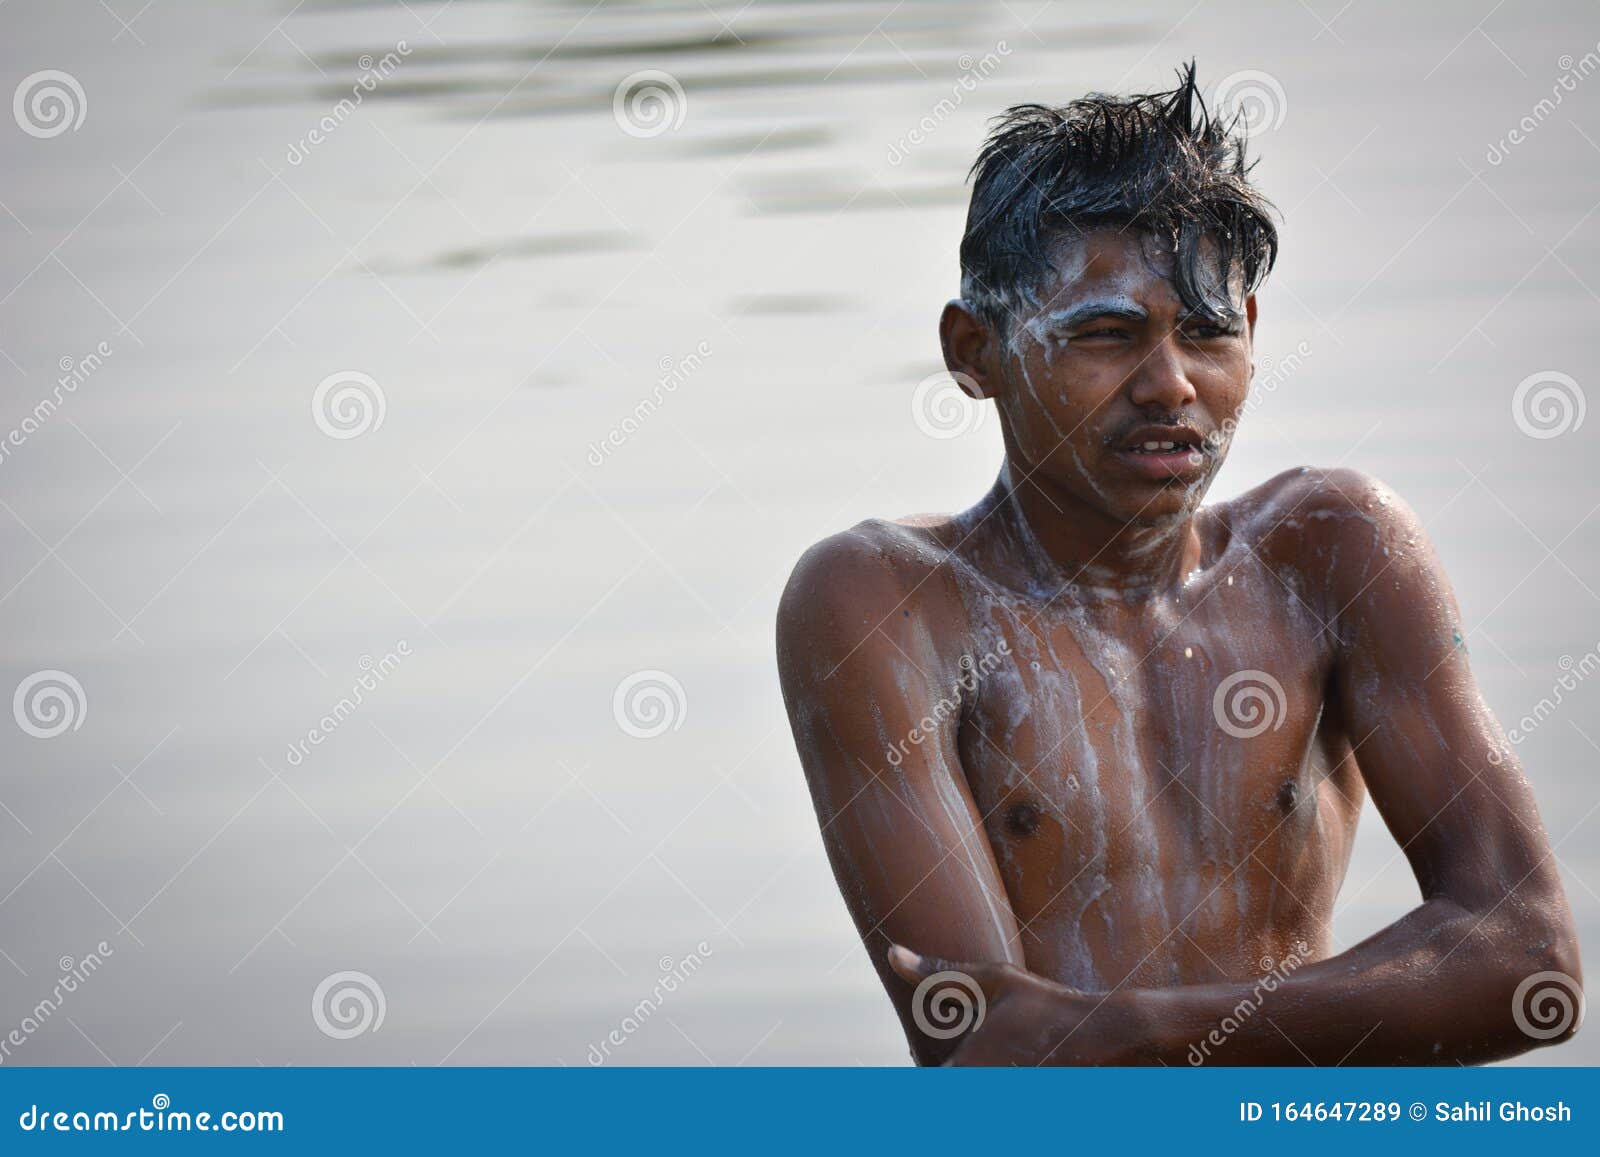 Indian Village Boy Bathing In The River On Morning Editorial Stock